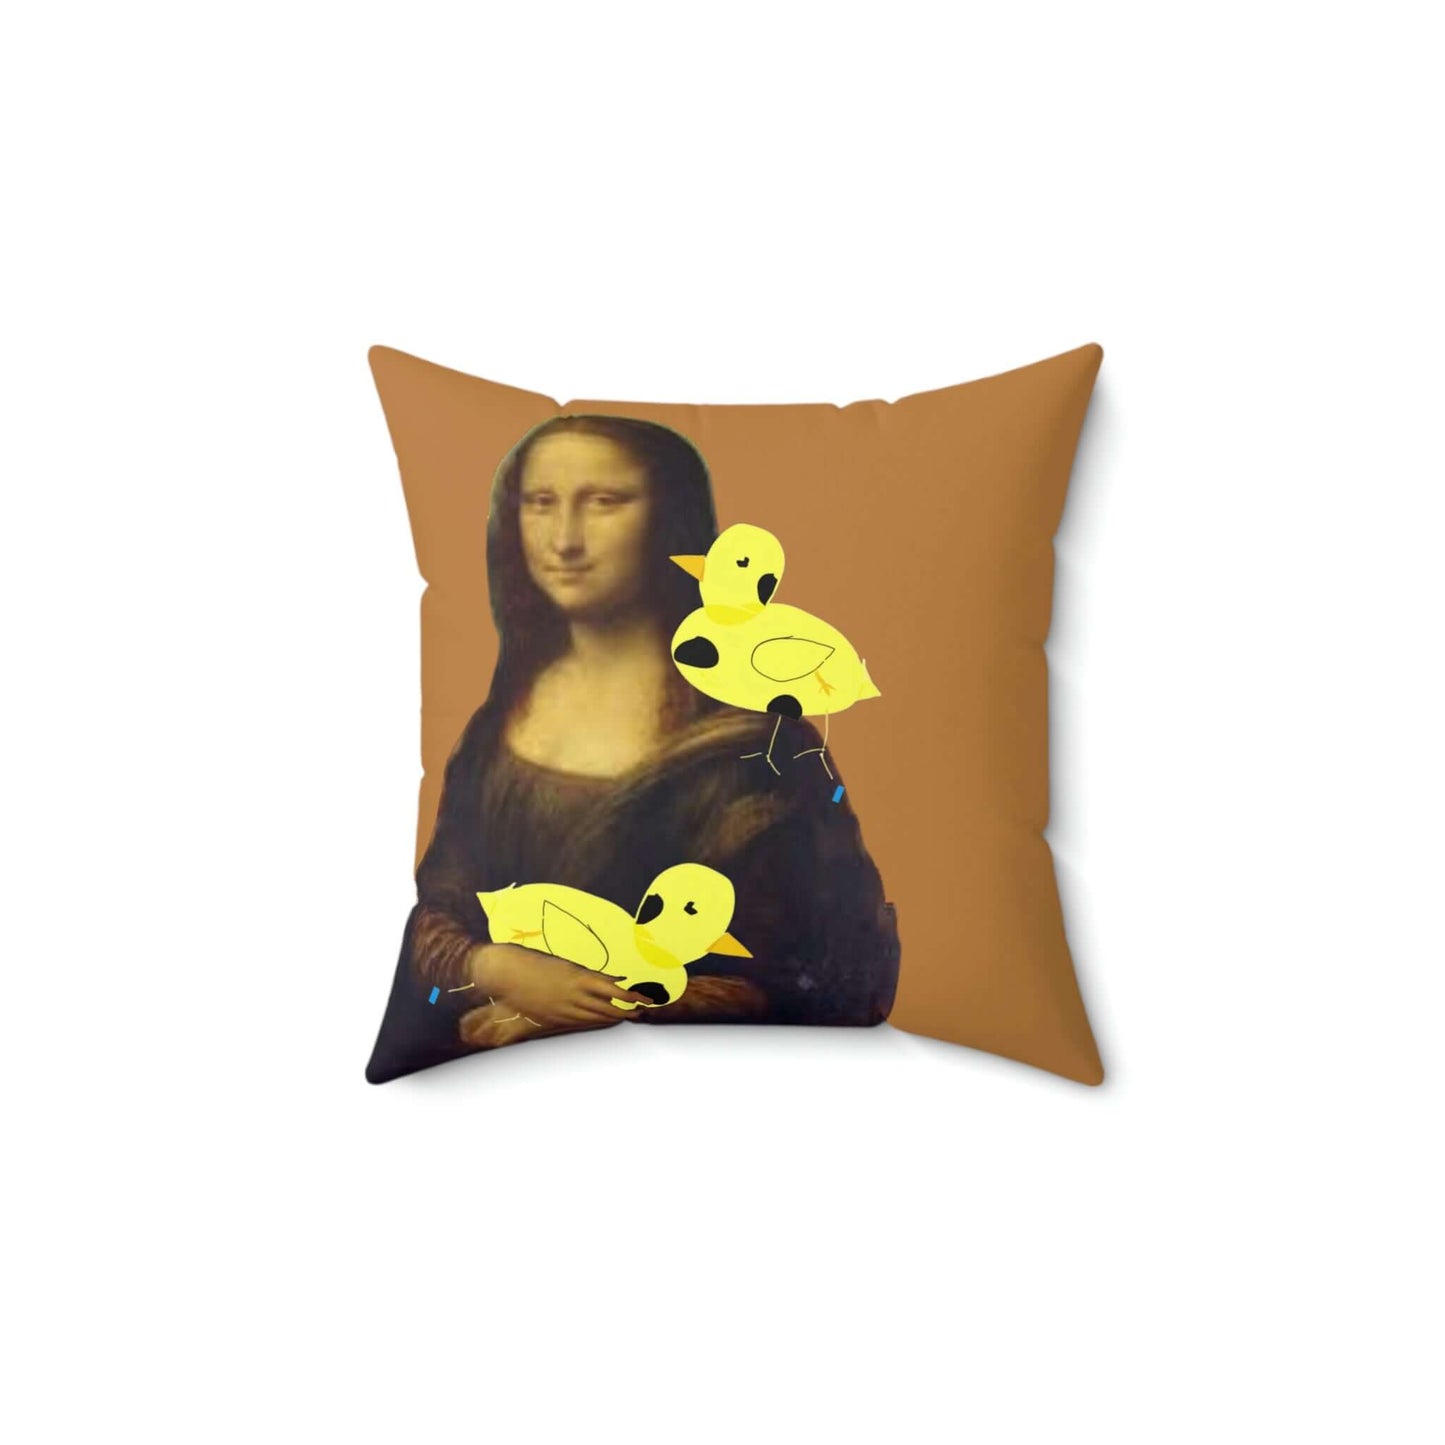 Faux Suede Square Pillow Case with Mona 'The Crazy Chicken Lady' Lisa print by D.B.